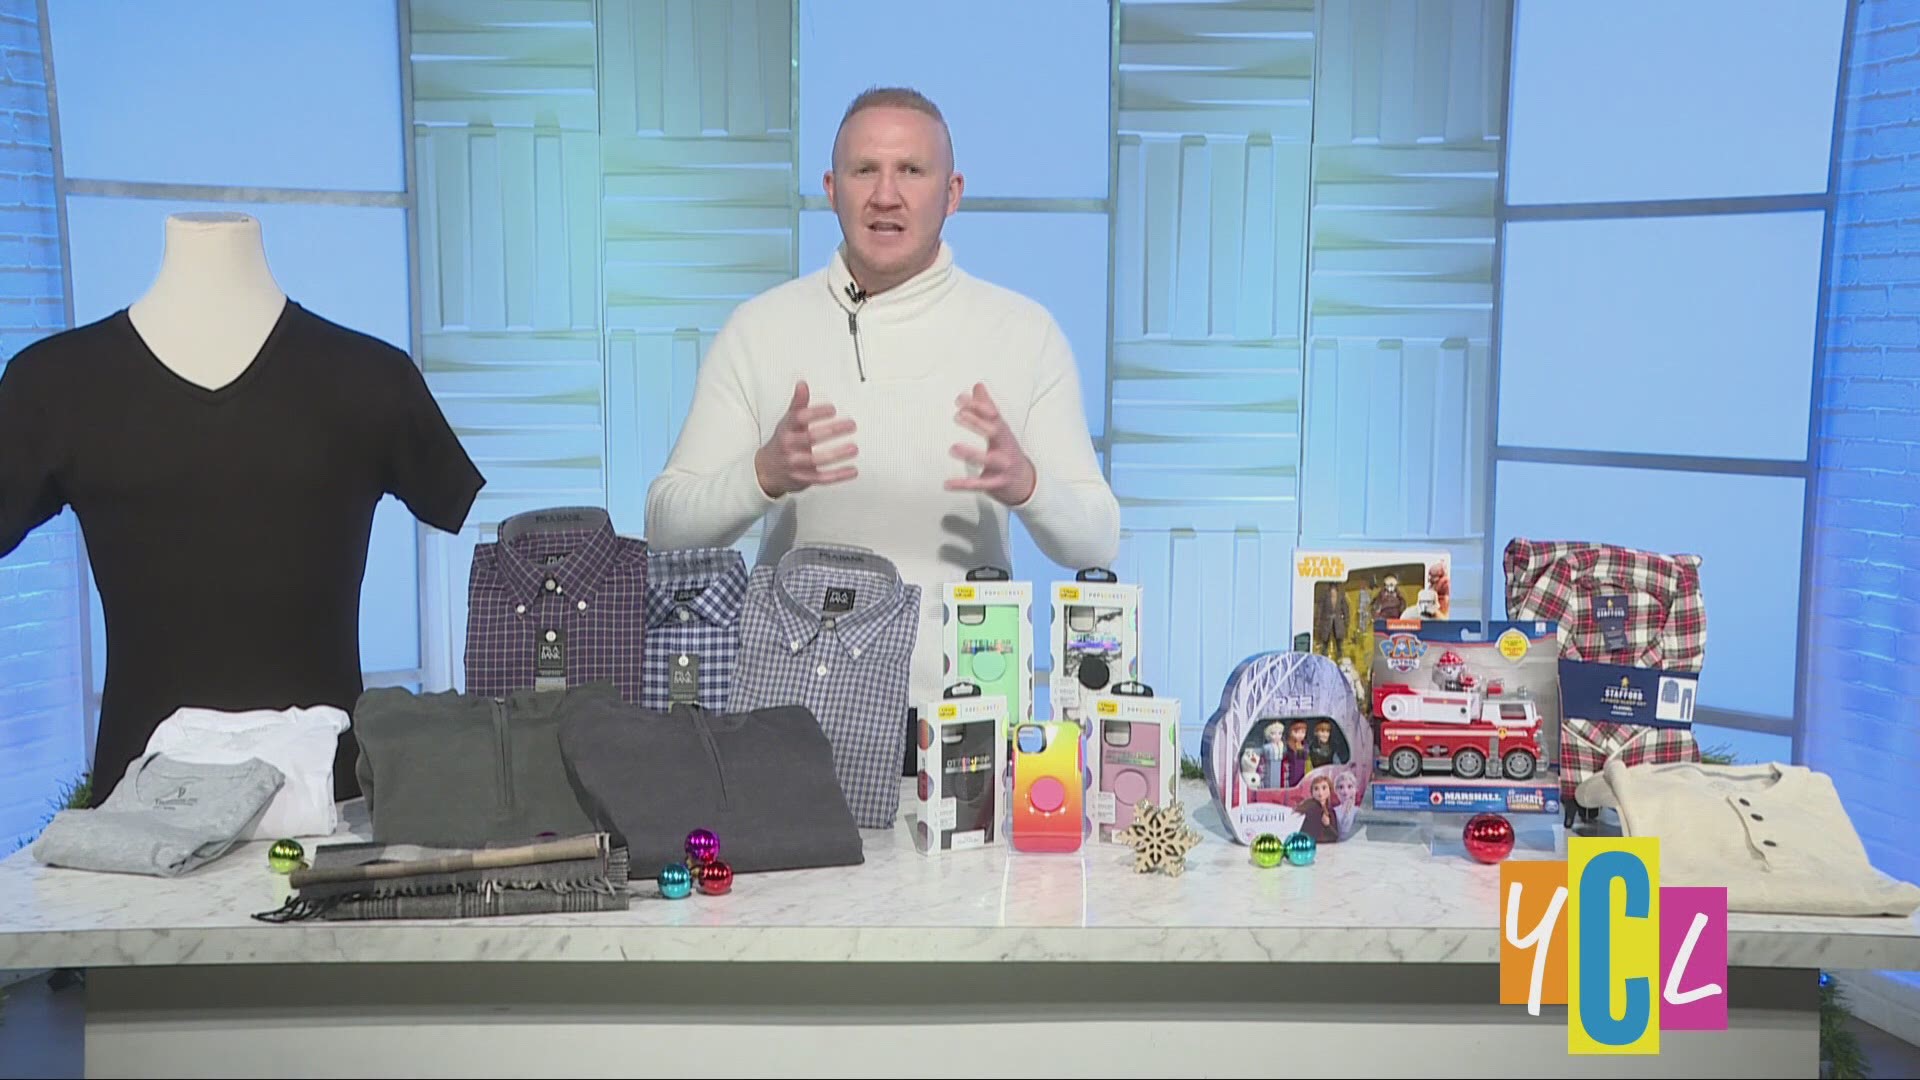 Lifestyle Expert, Josh McBride tells us about some great gifts for the holiday season. The following is a paid segment.